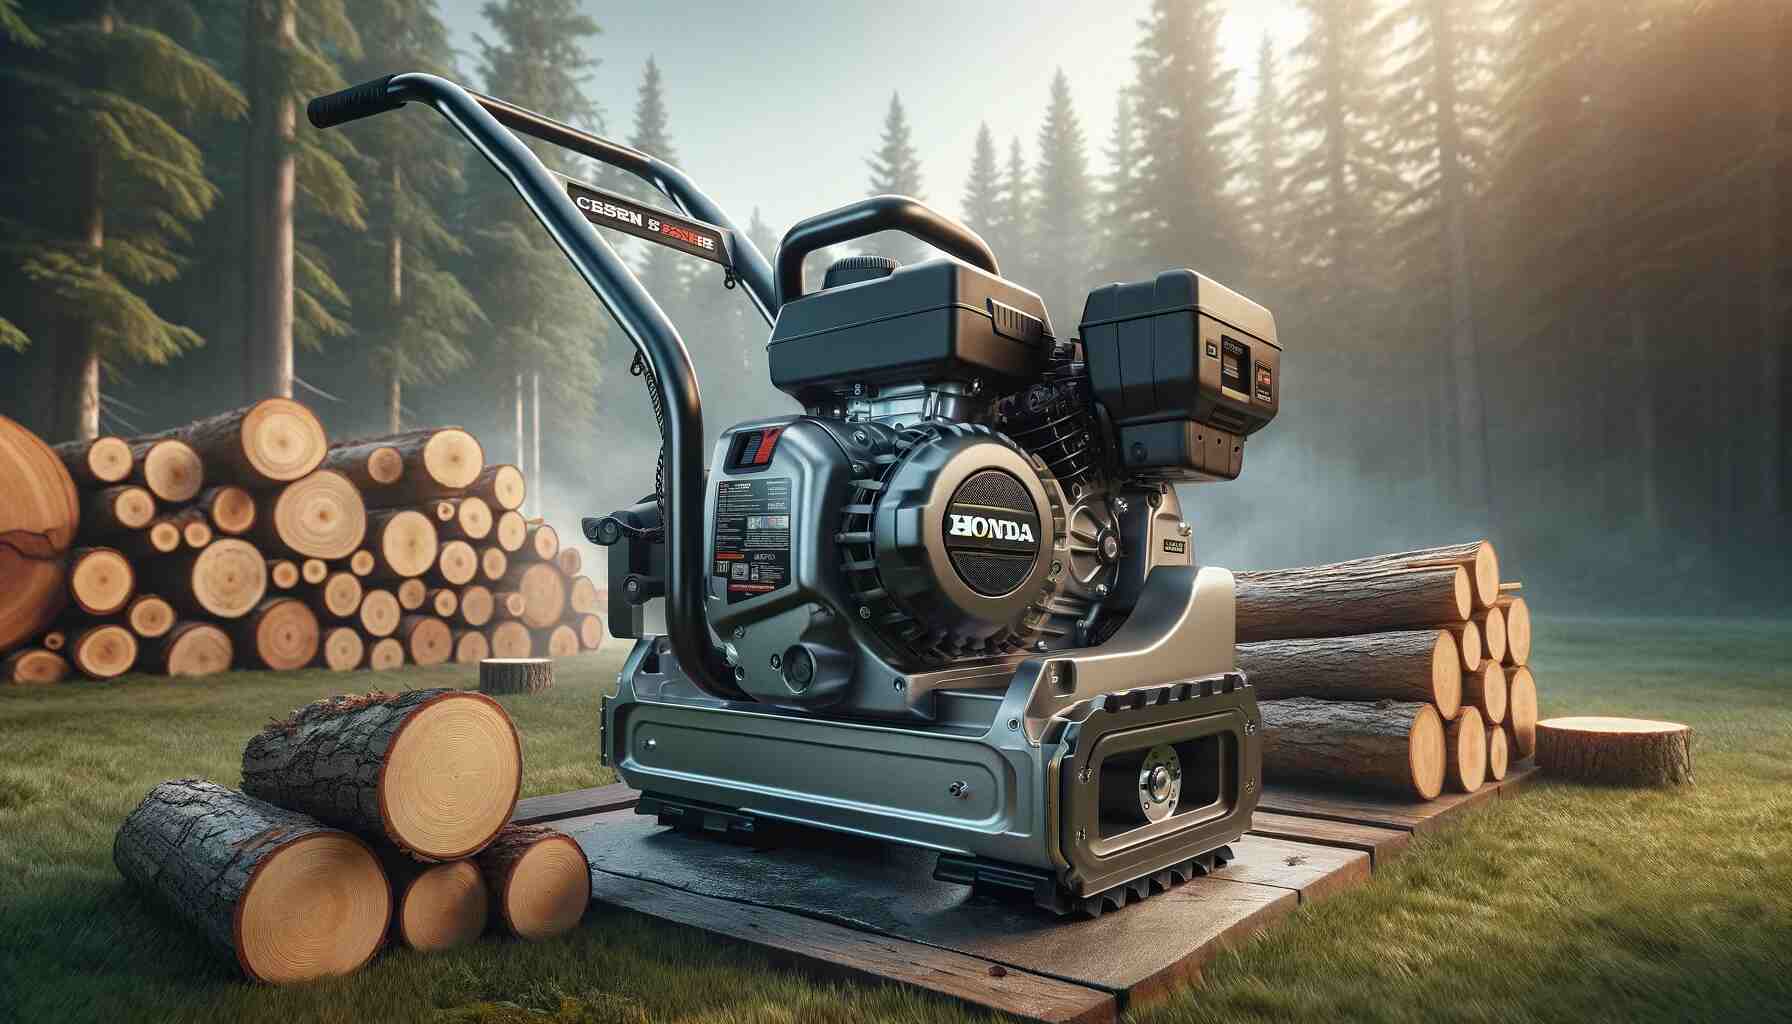 Here is the featured image for "Best Log Splitter with a Honda Engine". It showcases a top-of-the-line log splitter with a prominently displayed Honda engine, set in an outdoor environment with a serene forest background.